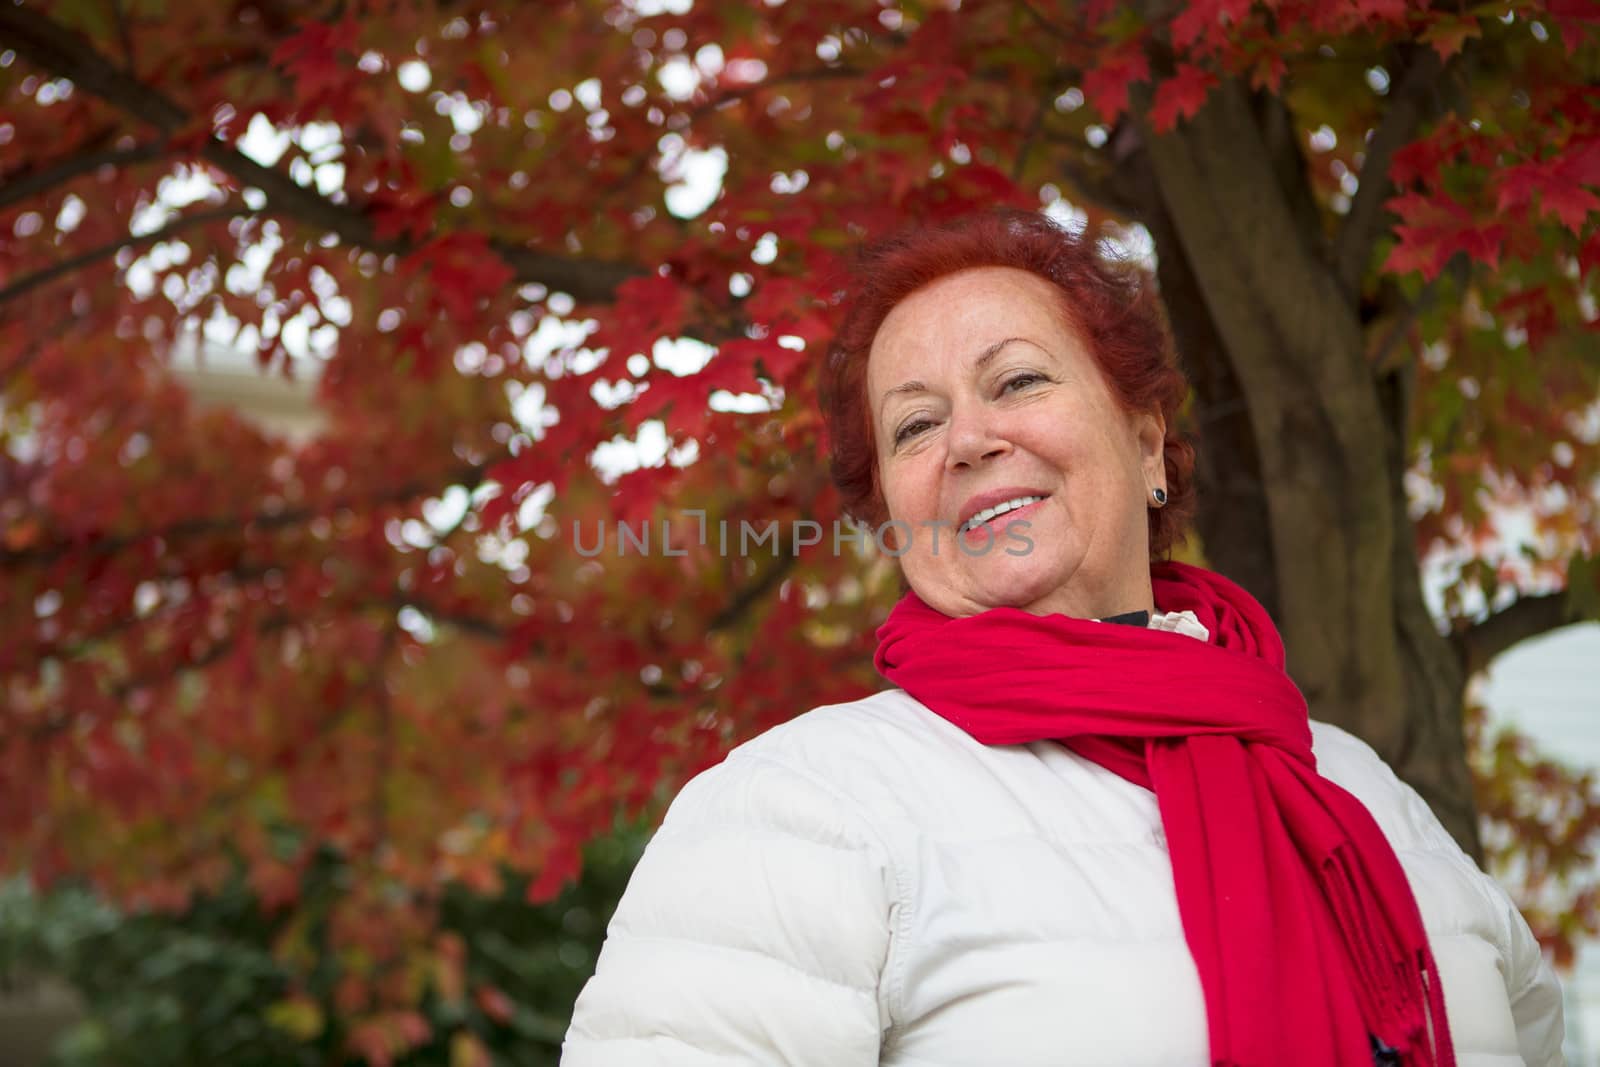 Red hair senior lady under the tree with red leaves looking at you happily with her red scarf and white coat